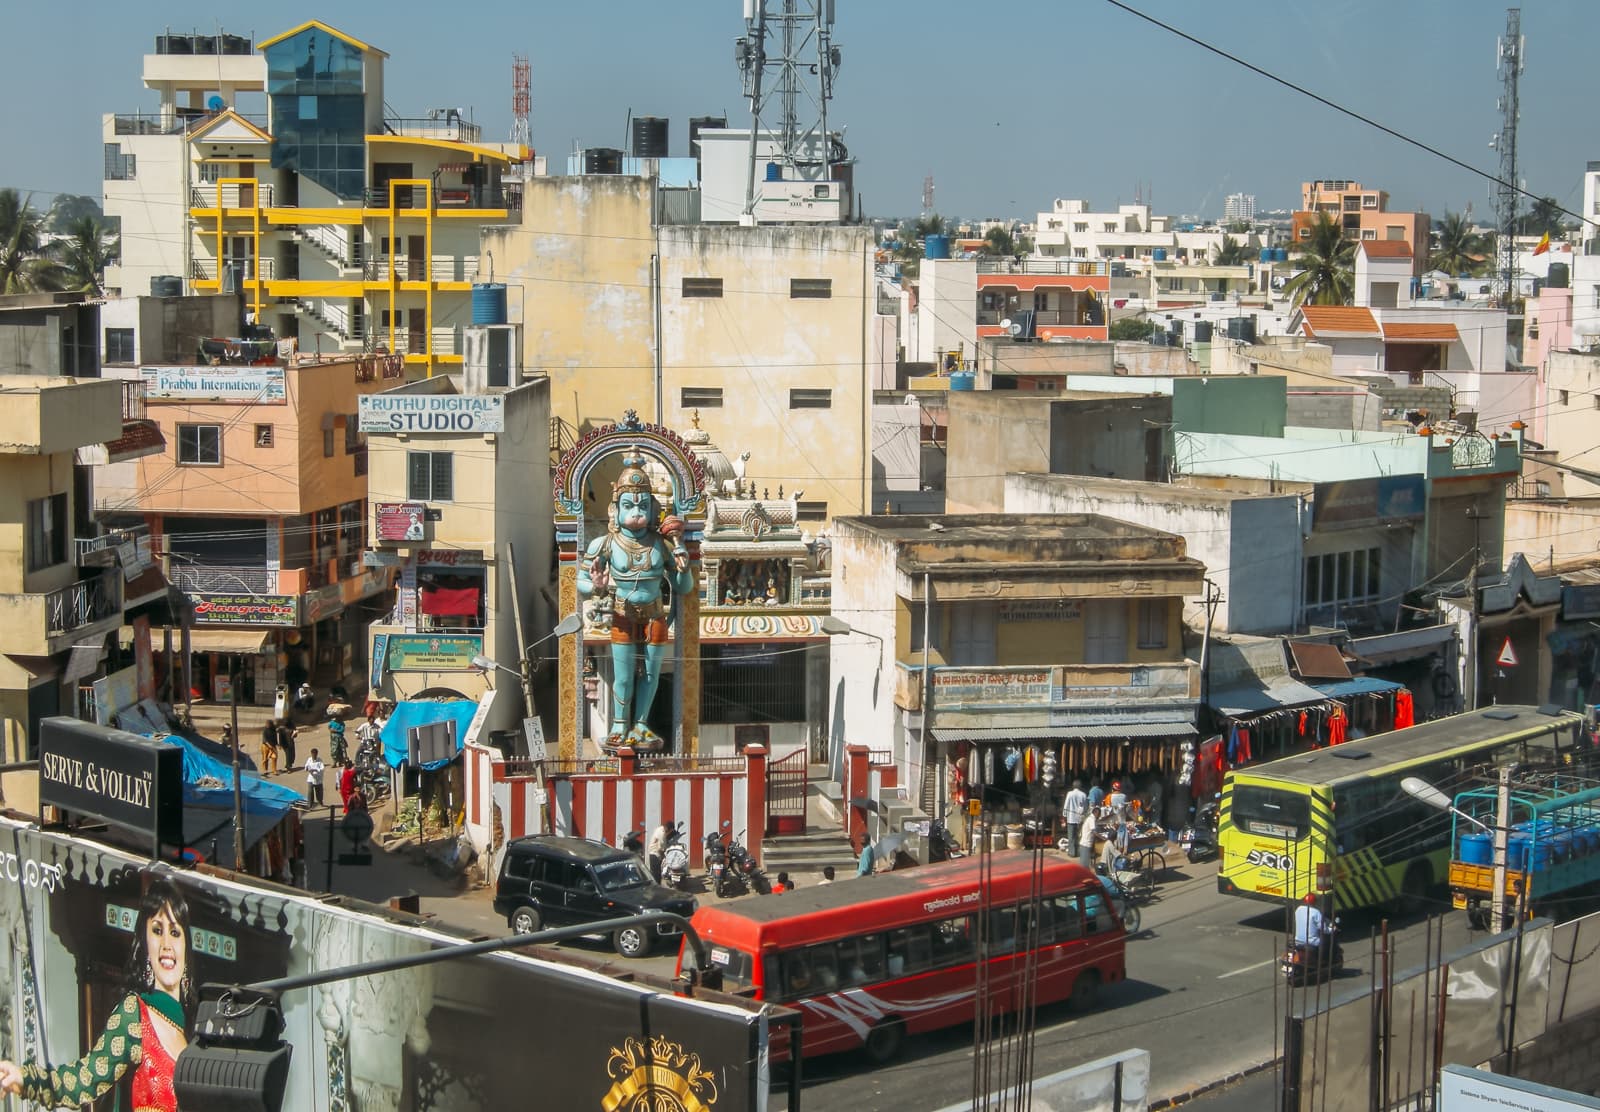 Bangalore, India, A Enormous City Famous For Technology and Religion